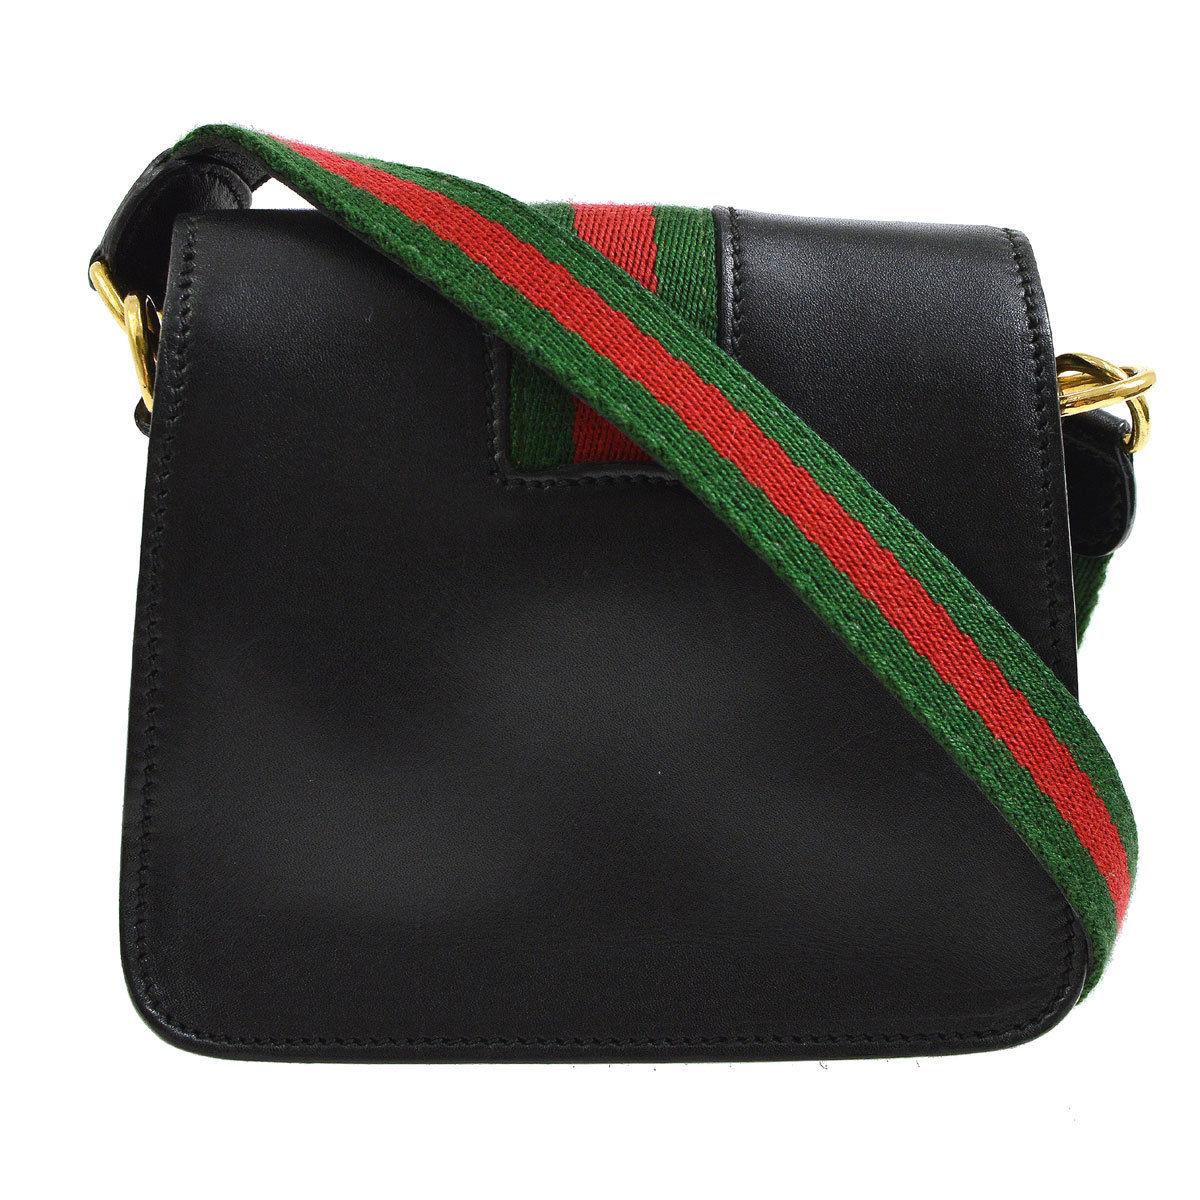 black gucci crossbody with red and green strap